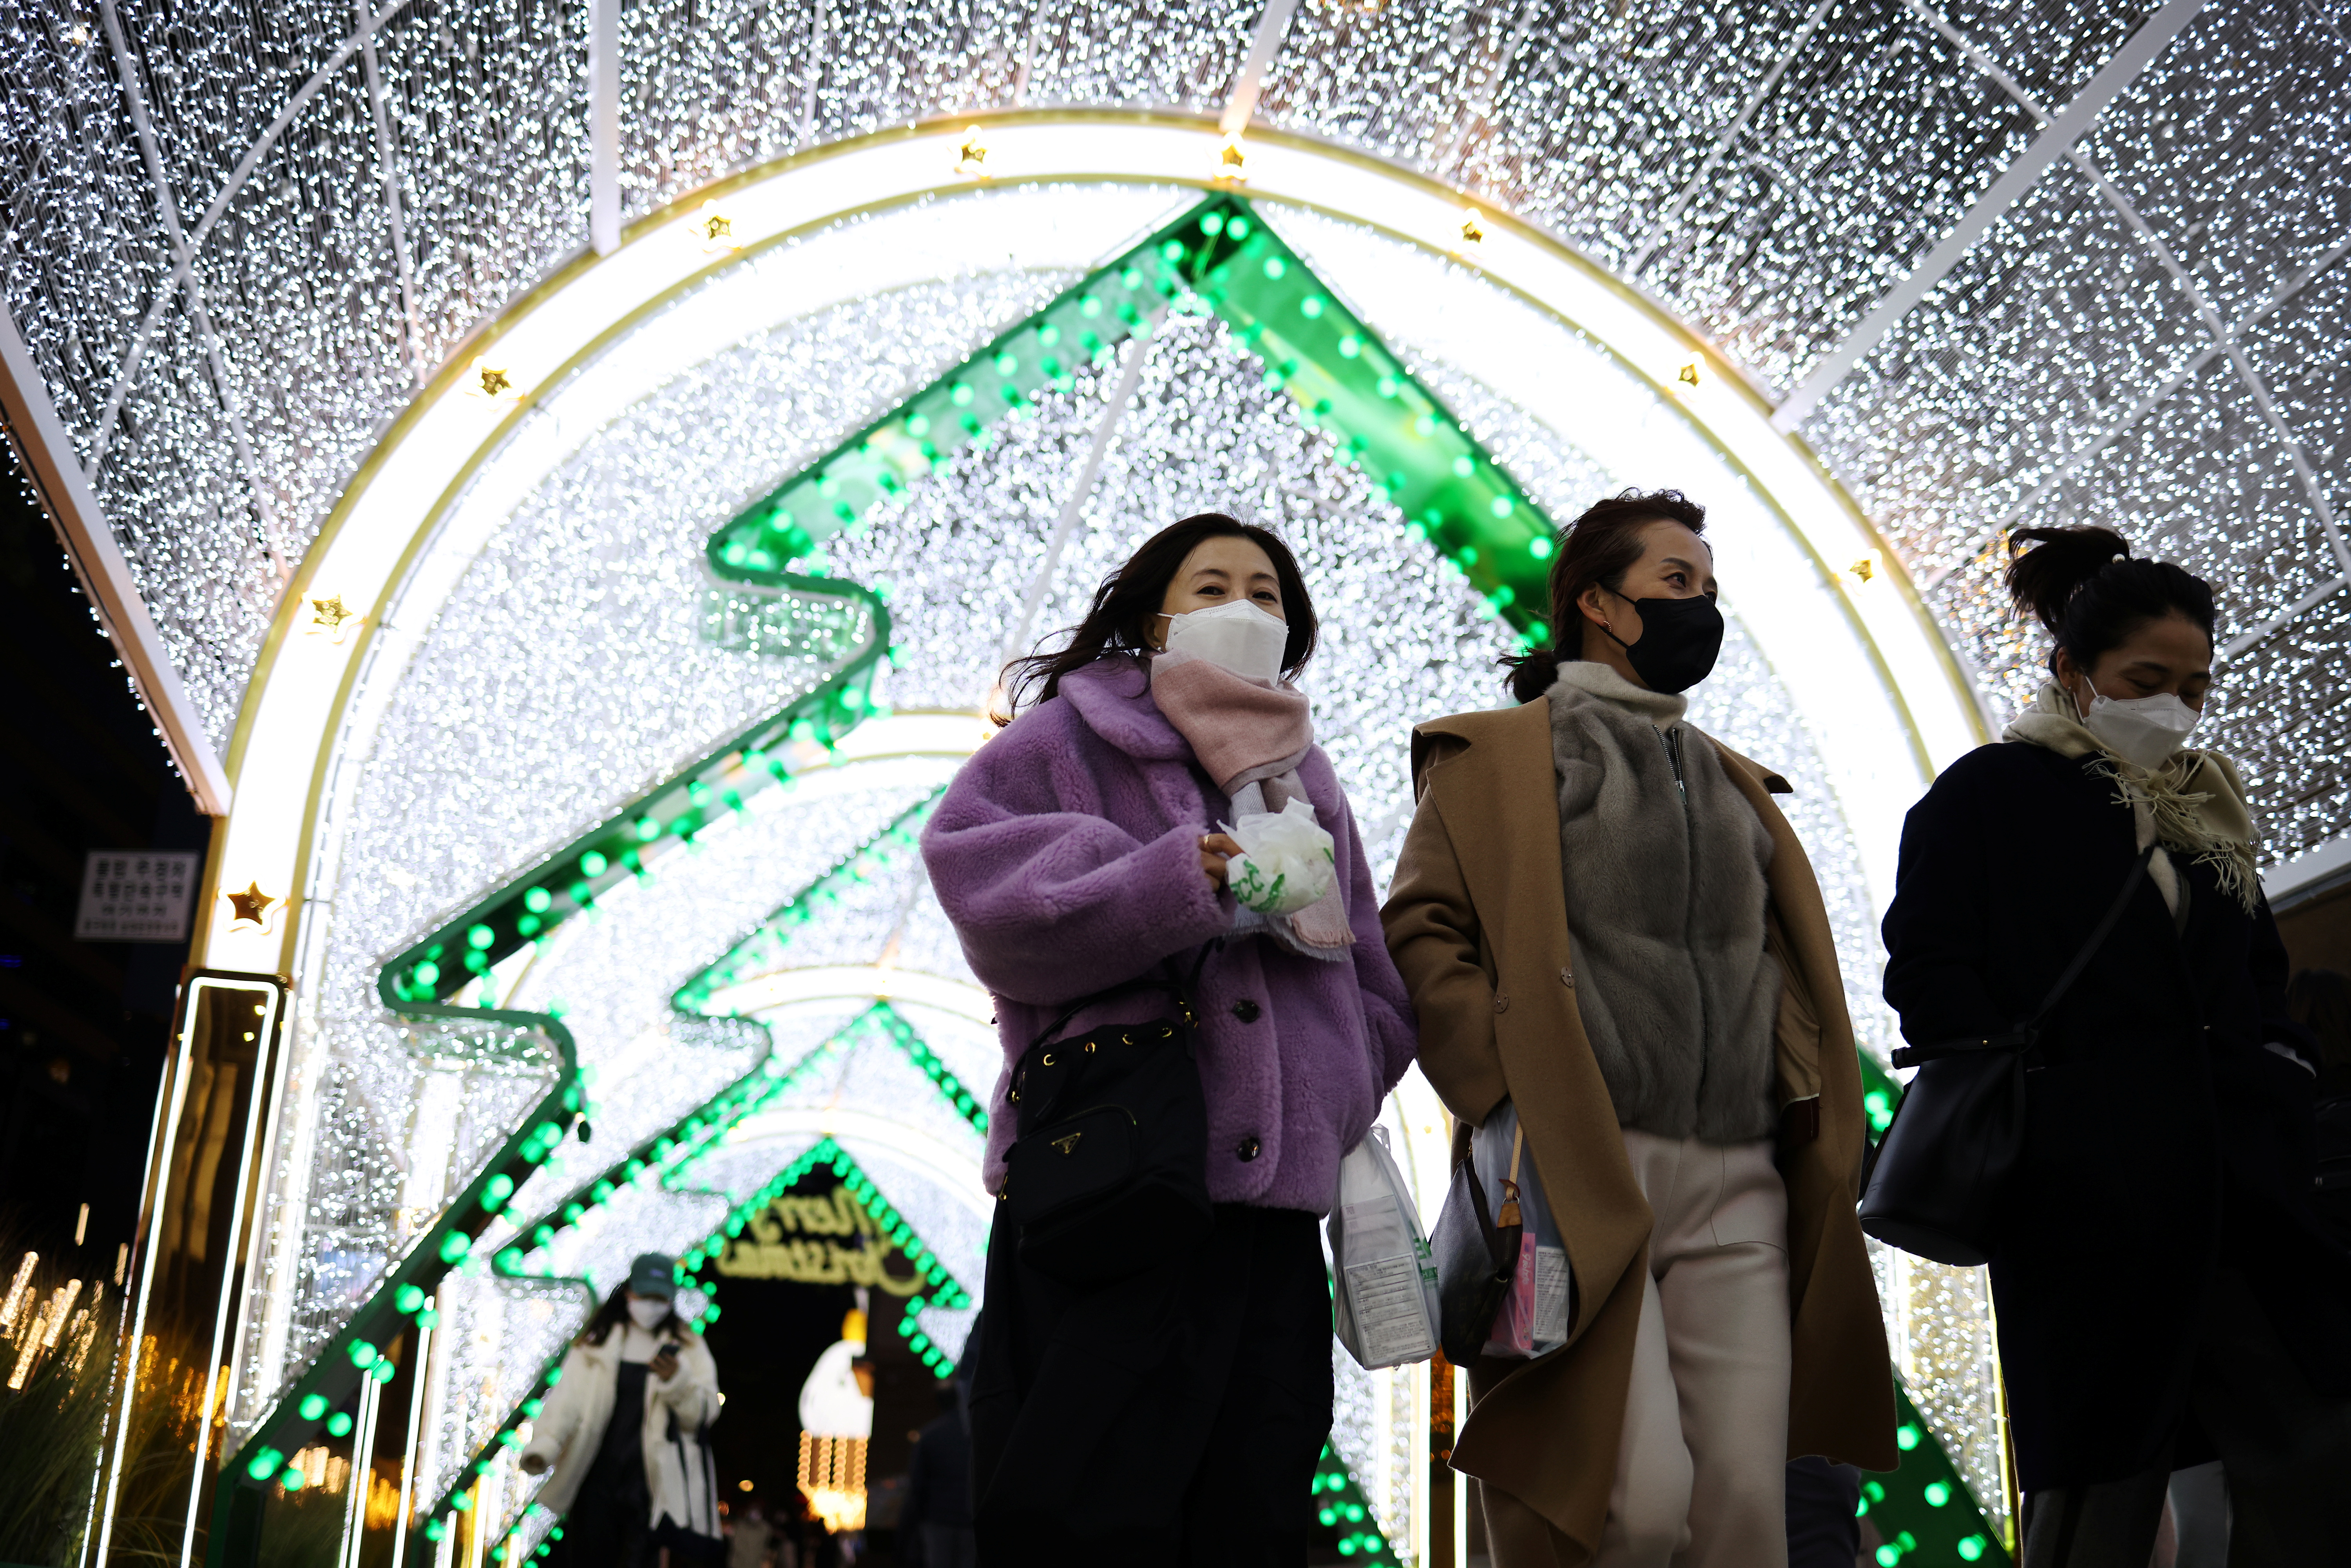 Women wearing masks to prevent contracting the coronavirus disease (COVID-19) walk under a Christmas illumination at a shopping district in central Seoul, South Korea, December 1, 2021. REUTERS/Kim Hong-Ji